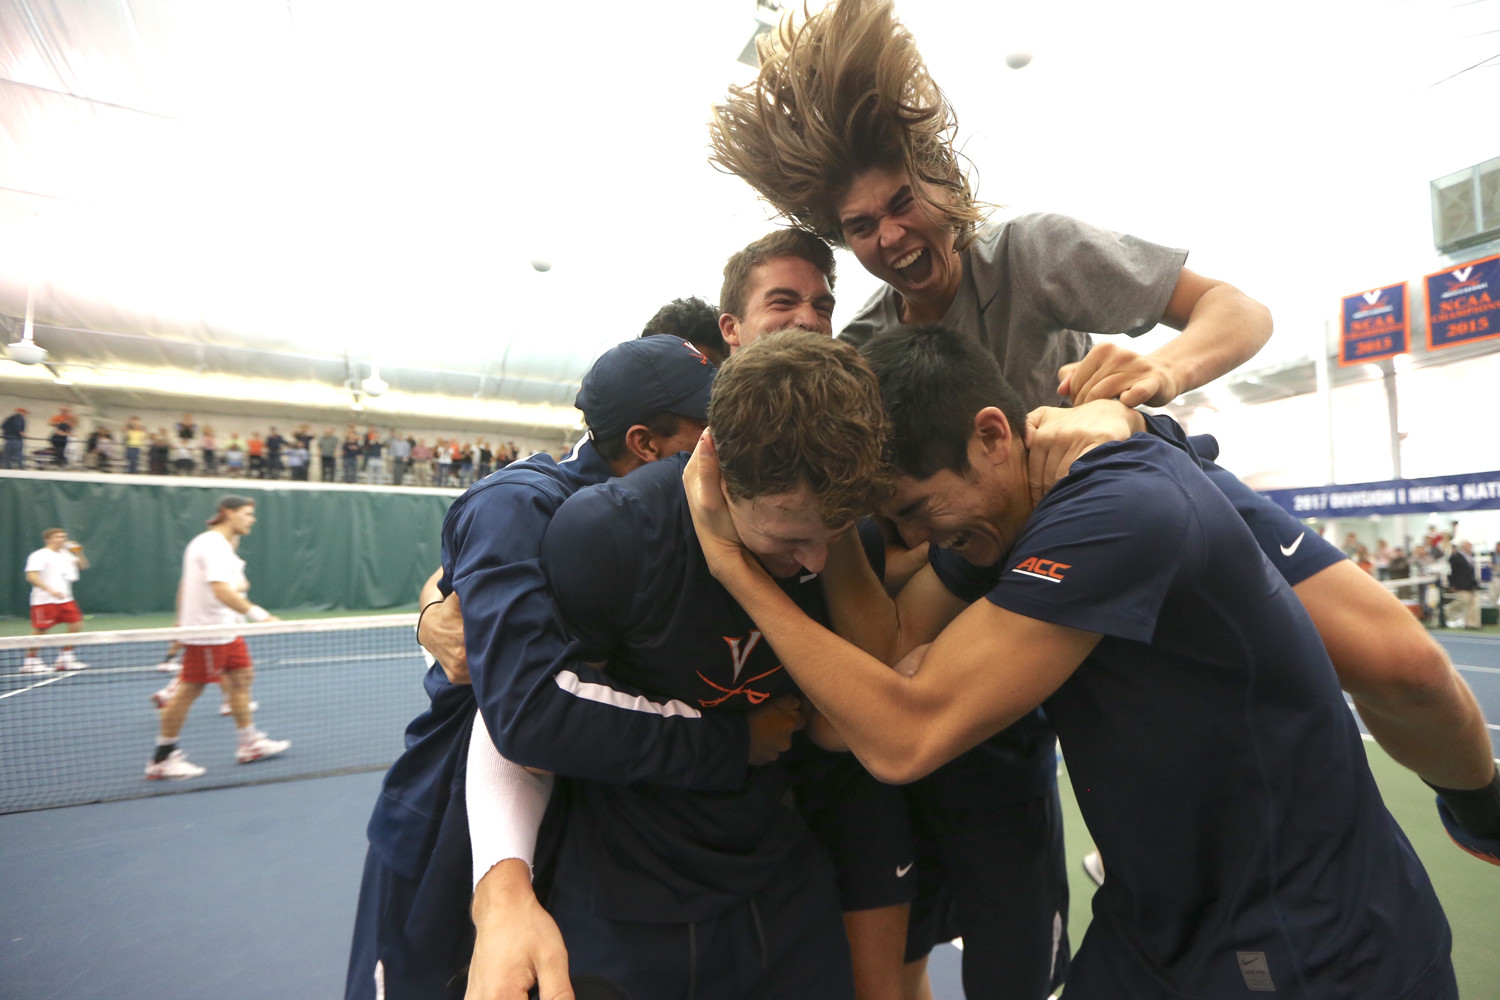 UVA Tennis team huddles together after victory on a match